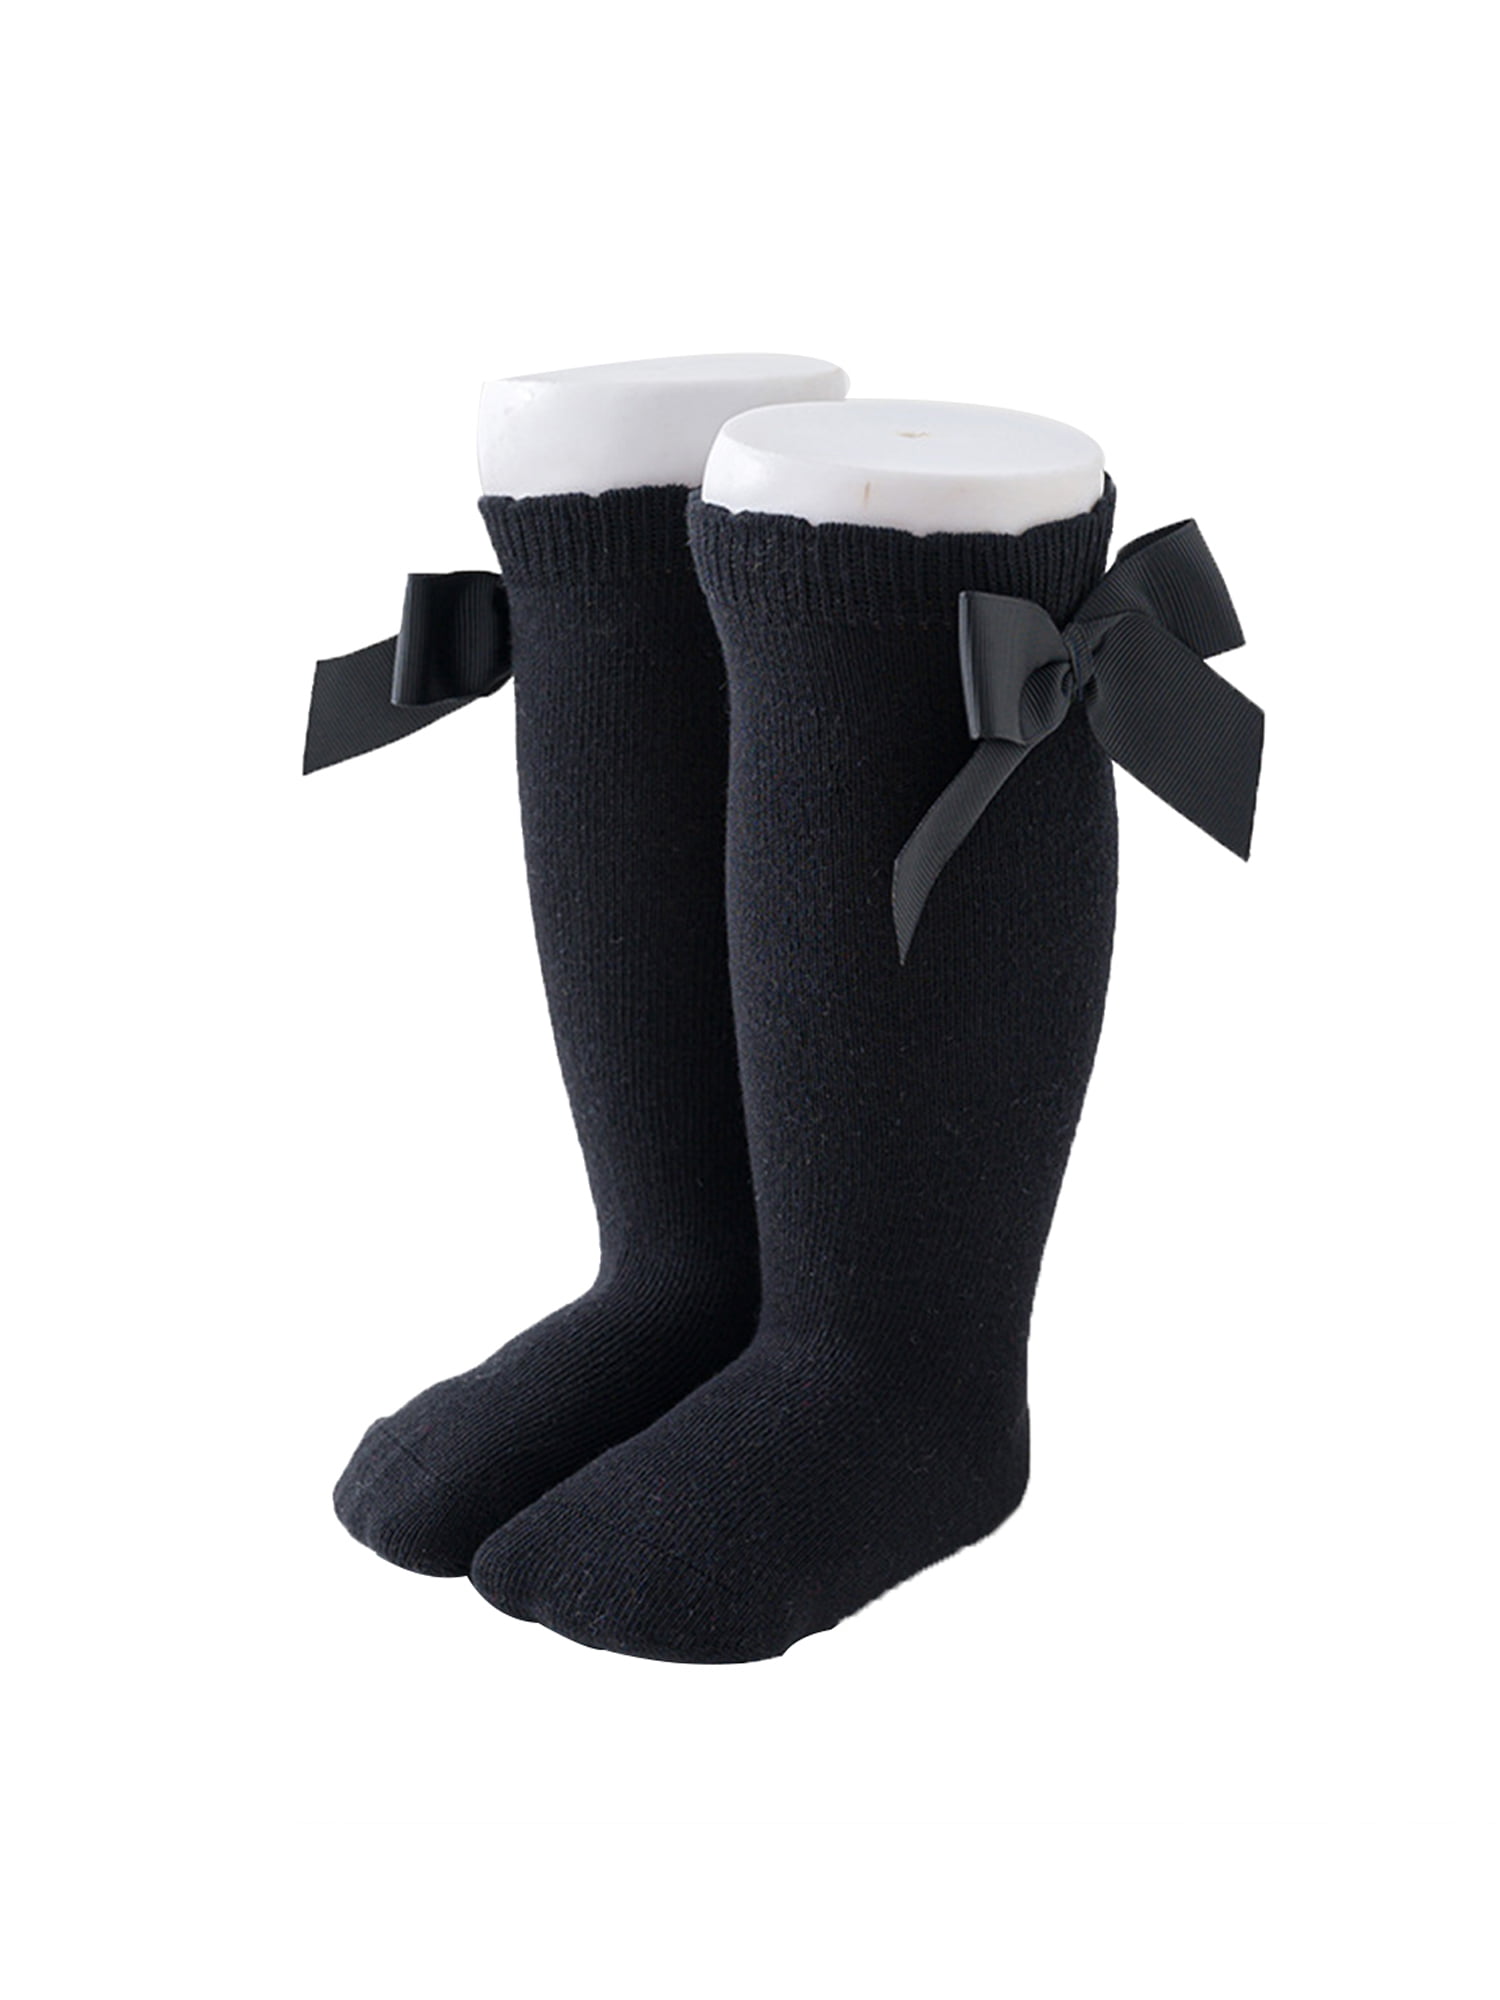 Details about   Men's Cotton 6 Pack Dress Breathable Casual Comfort Socks XLarge 13-15 Dark Navy